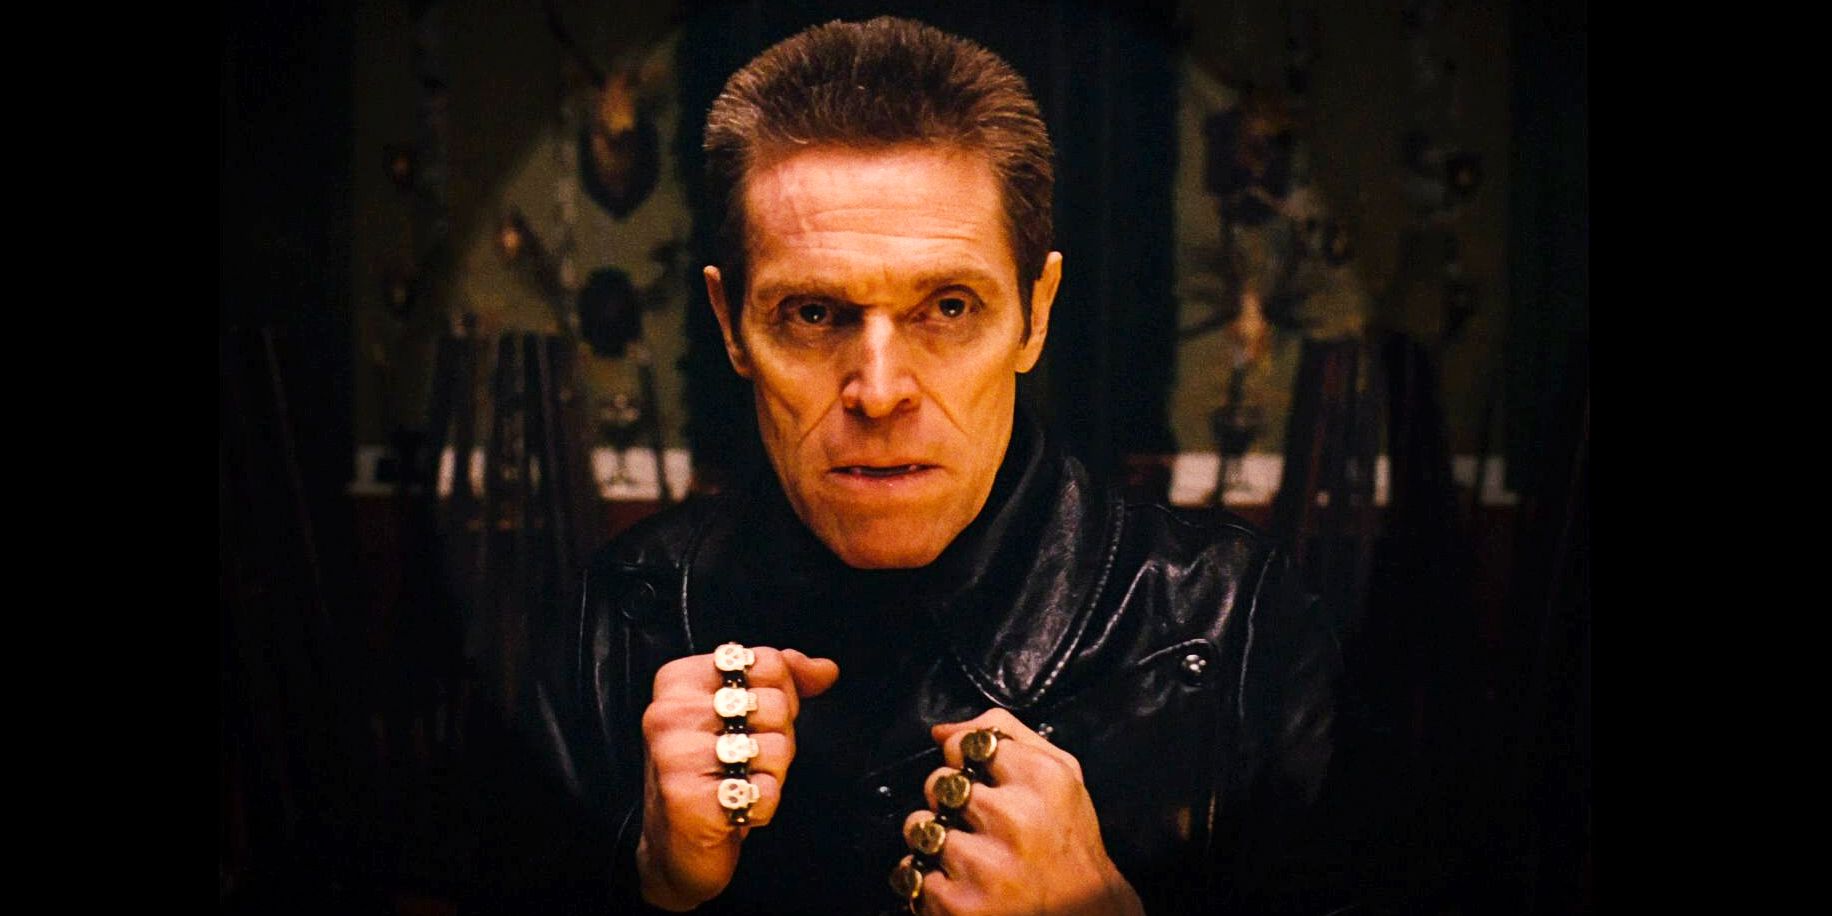 Willem Dafoe wearing brass knuckles in The Grand Budapest Hotel